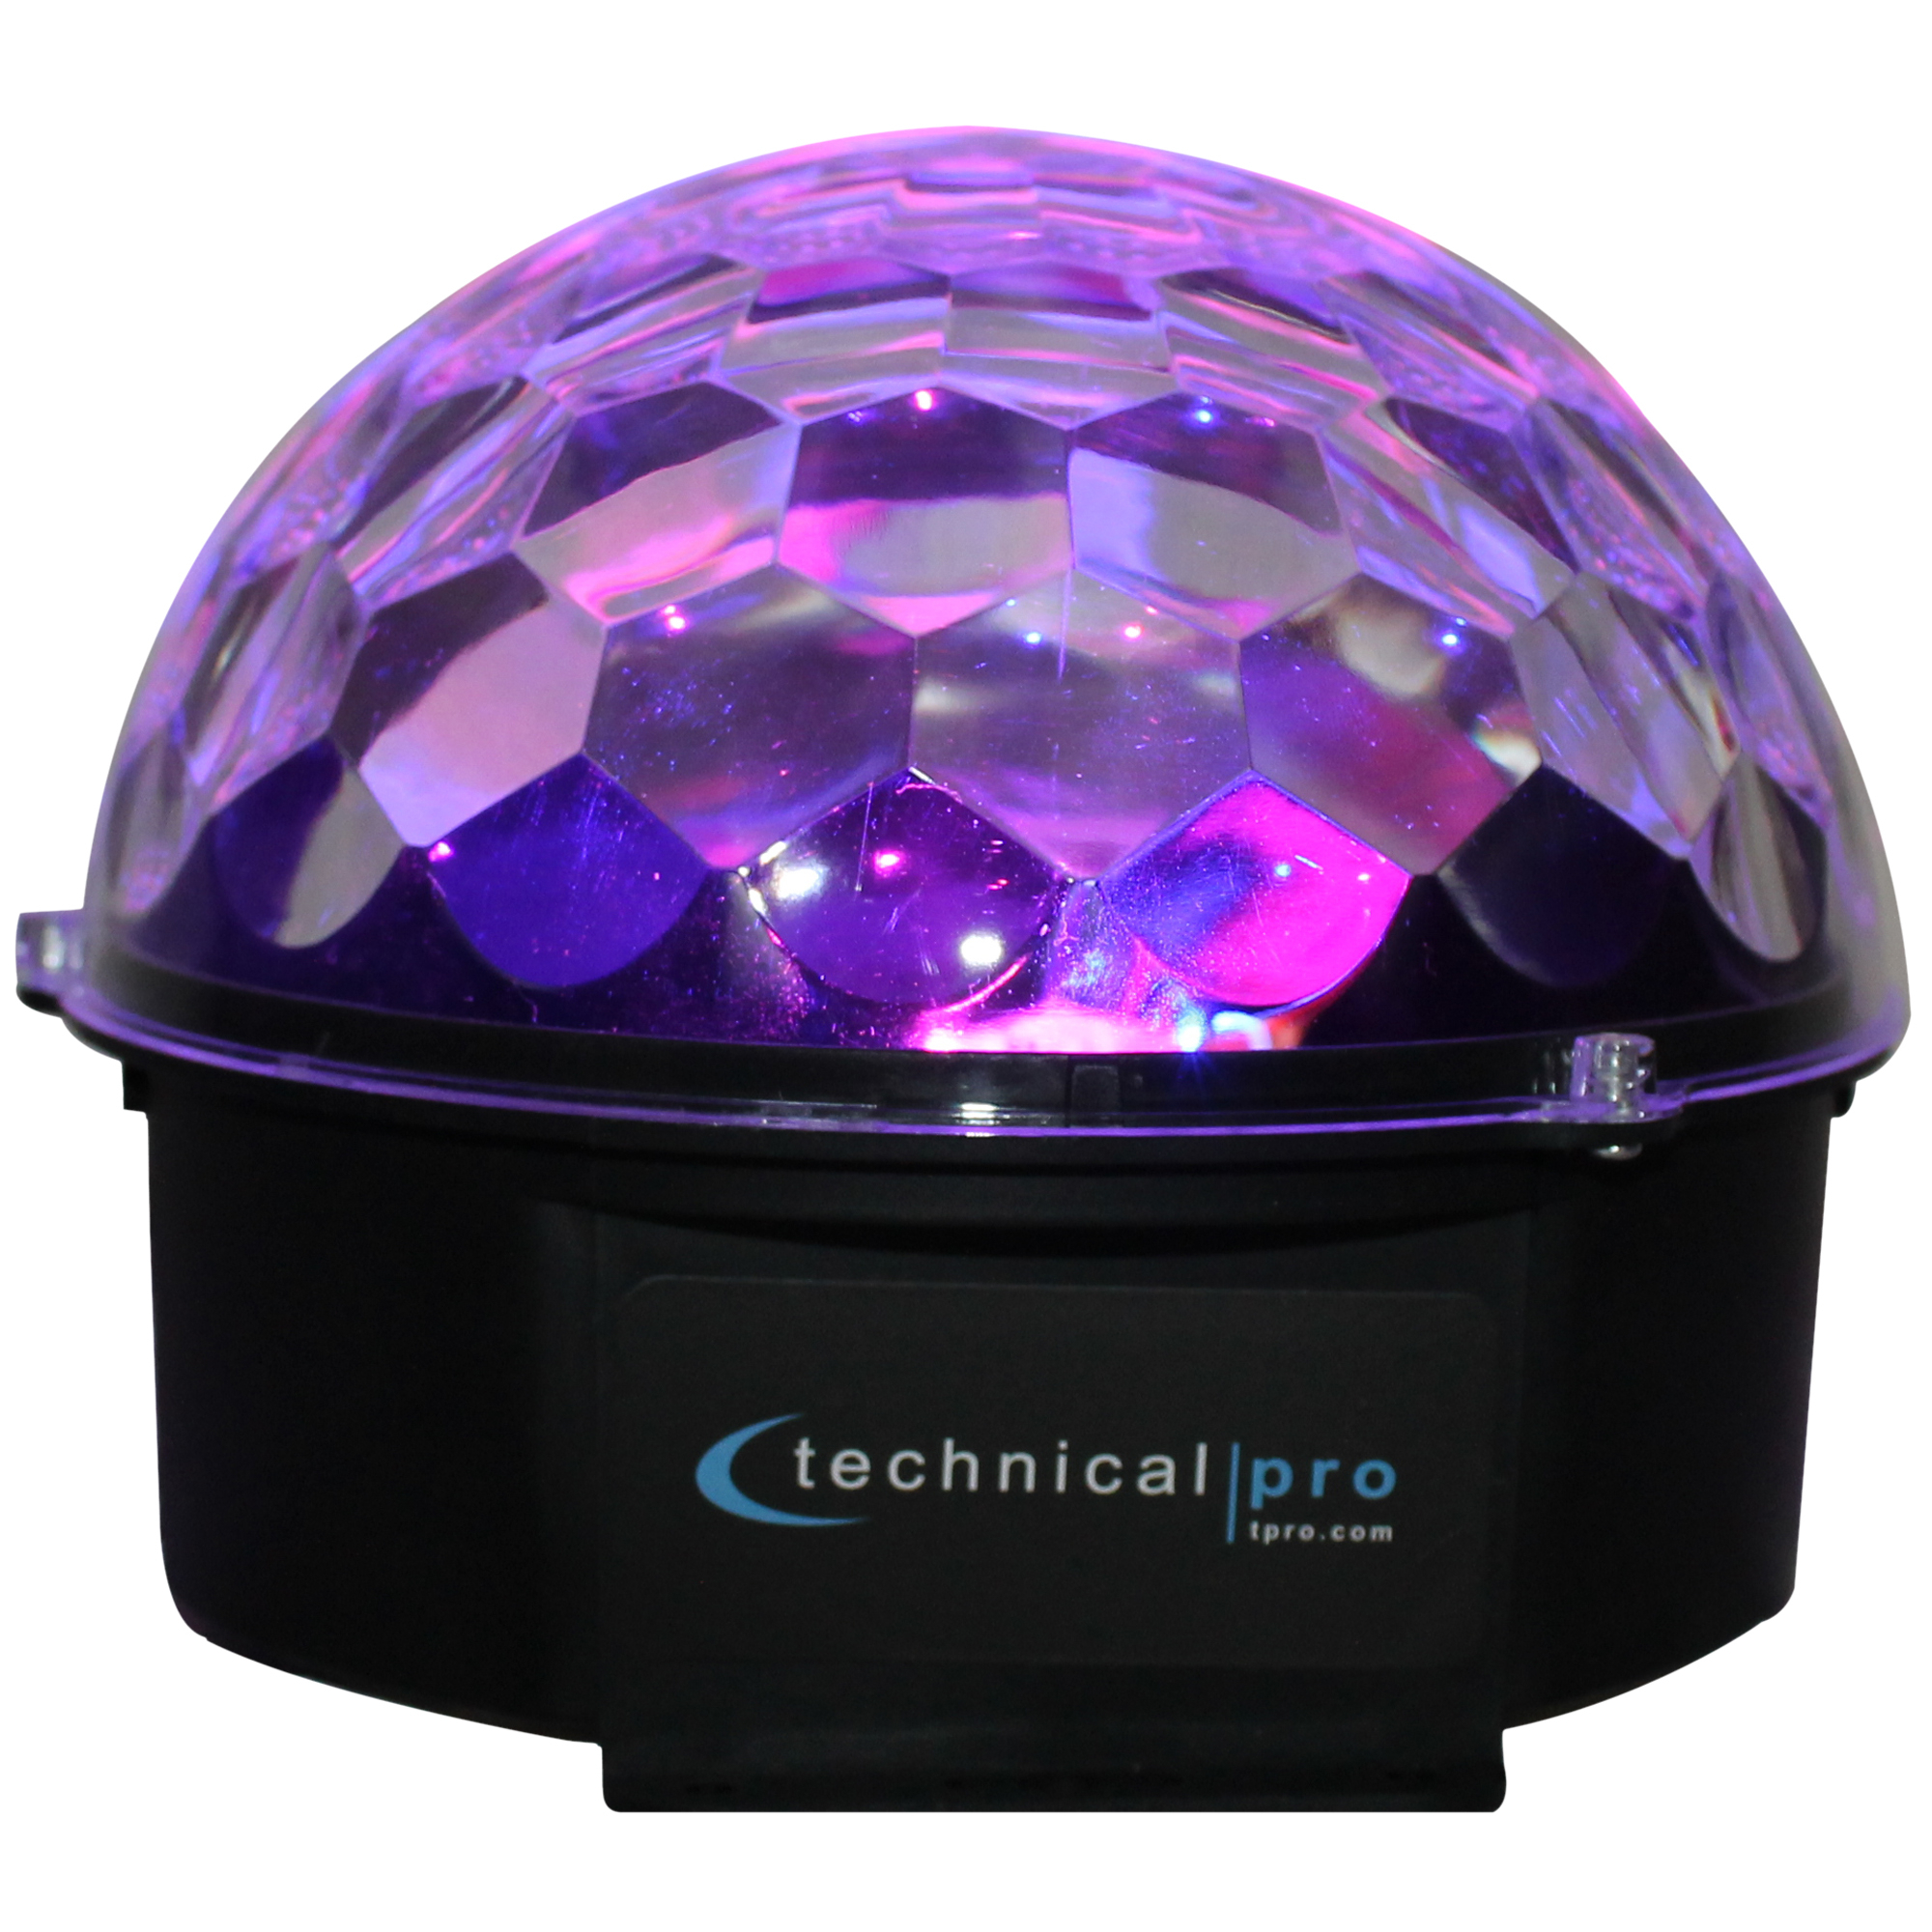 Technical Pro Rotating LED DJ Light, With 4 Selectable Color Patterns, For Club/Party Like Feel, Included Mounting Brackets & Power Cord